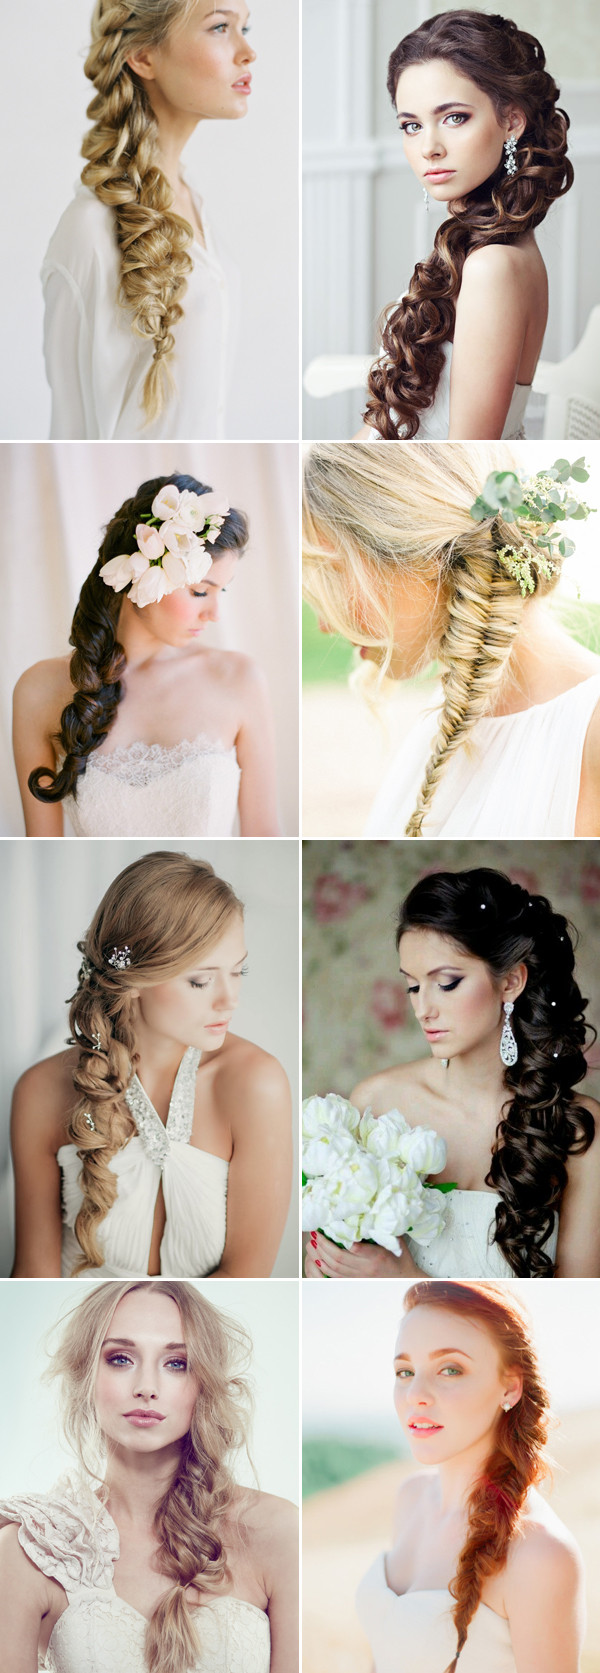 Side Hairstyles For Weddings
 42 Steal Worthy Wedding Hairstyles for Long Hair